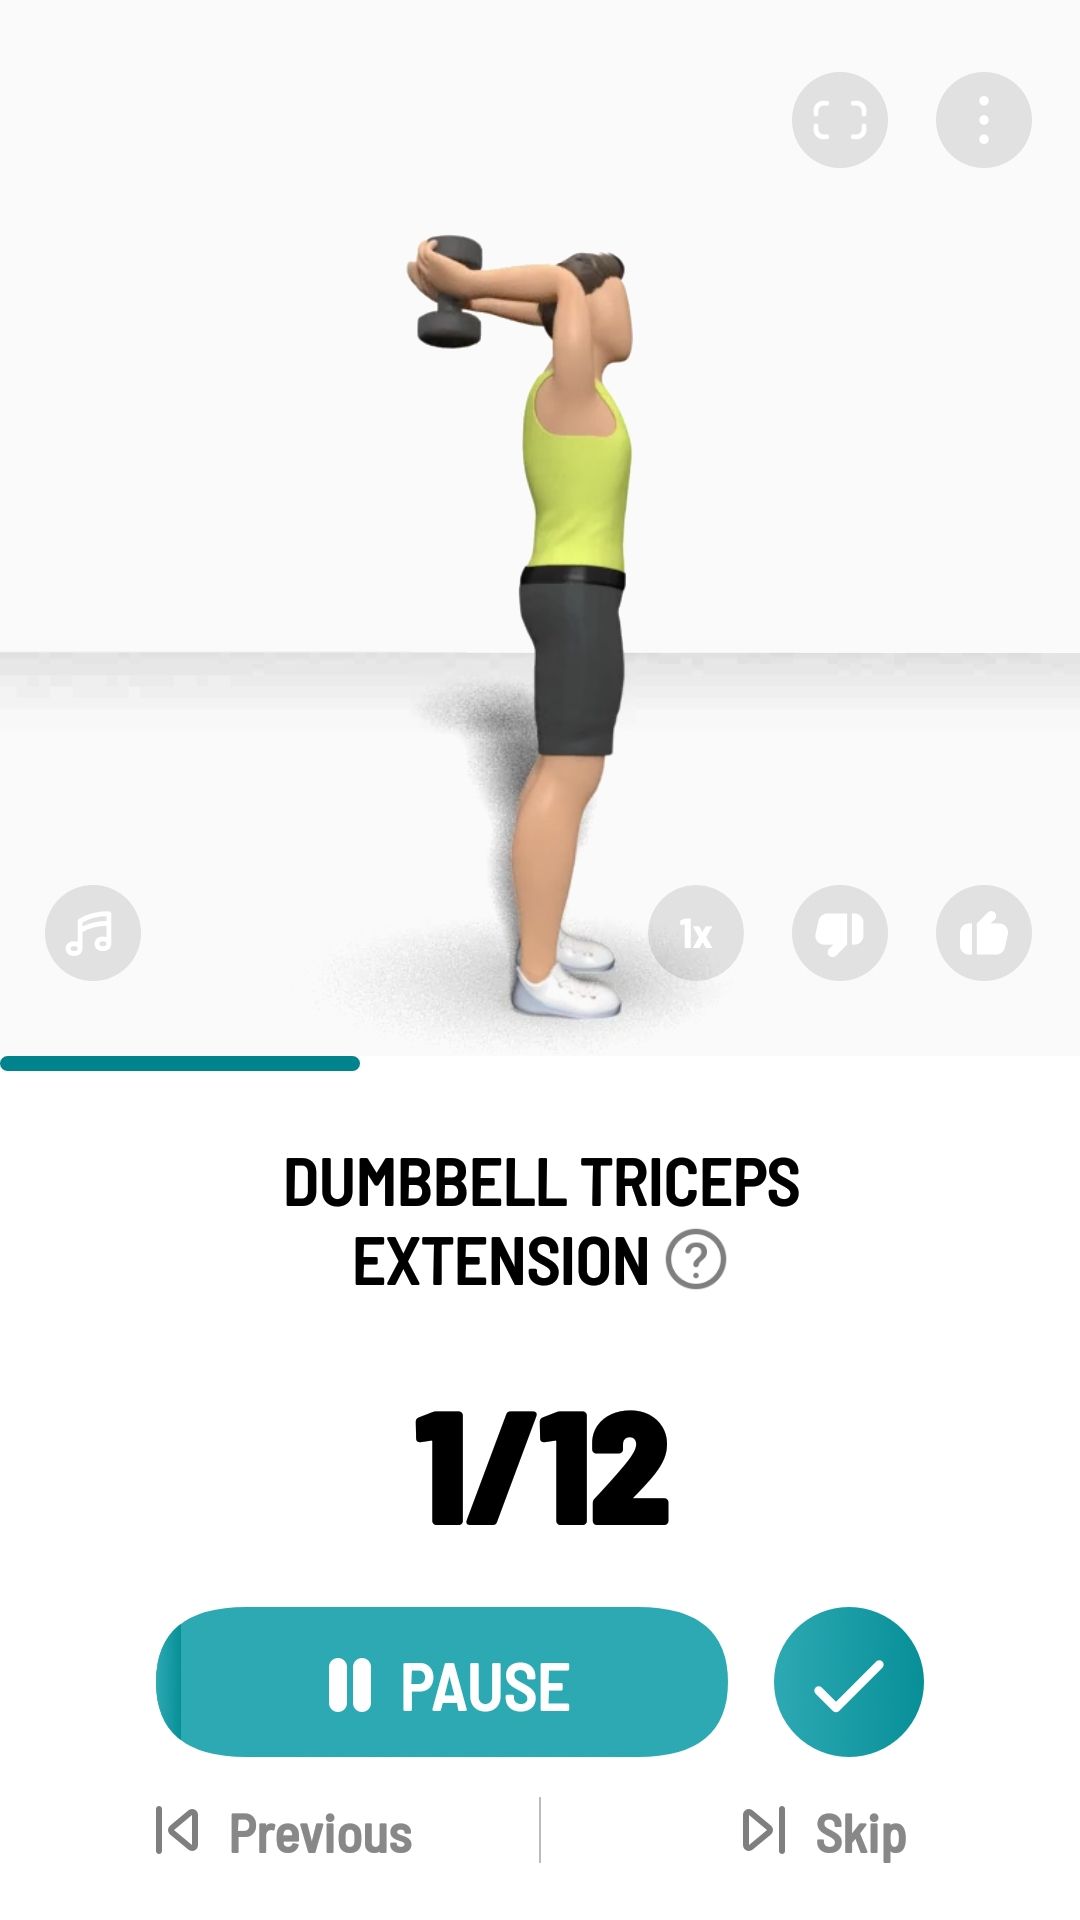 Dumbbell Workout at Home mobile fitness app